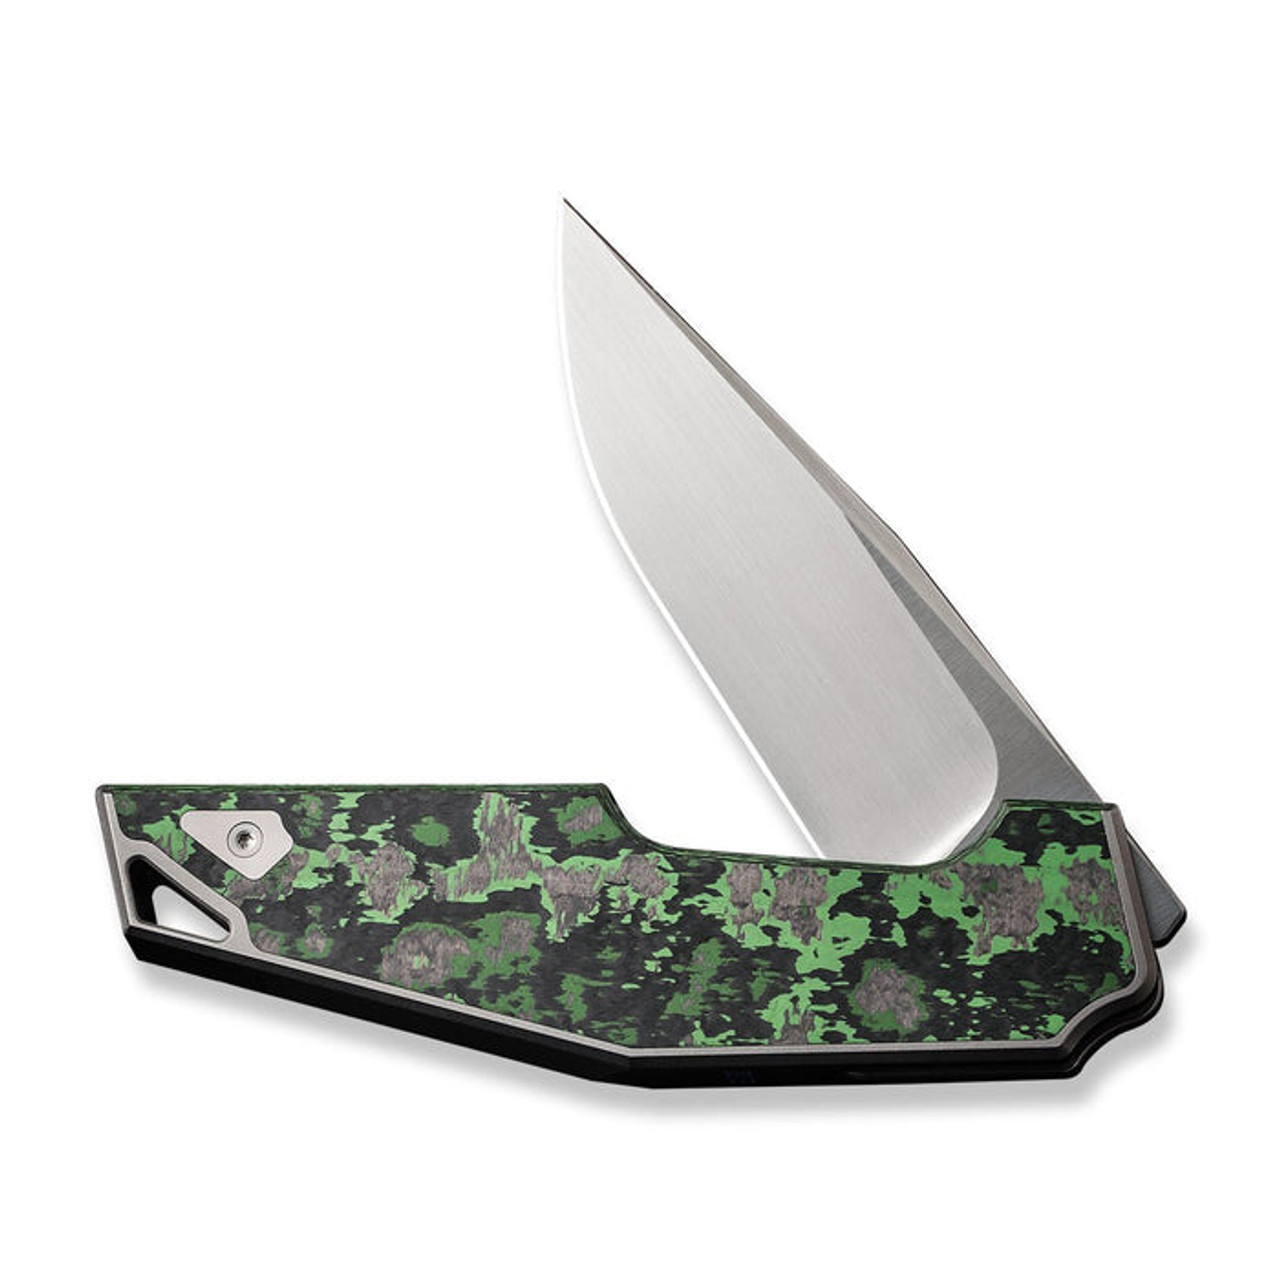 We Knife OAO (WE230013) 3.4" CPM-20CV Hand Rubbed Satin Clip Point Plain Blade, Gray / Black / Green Titanium Handle with Jungle Wear Fat Carbon Fiber Inlay